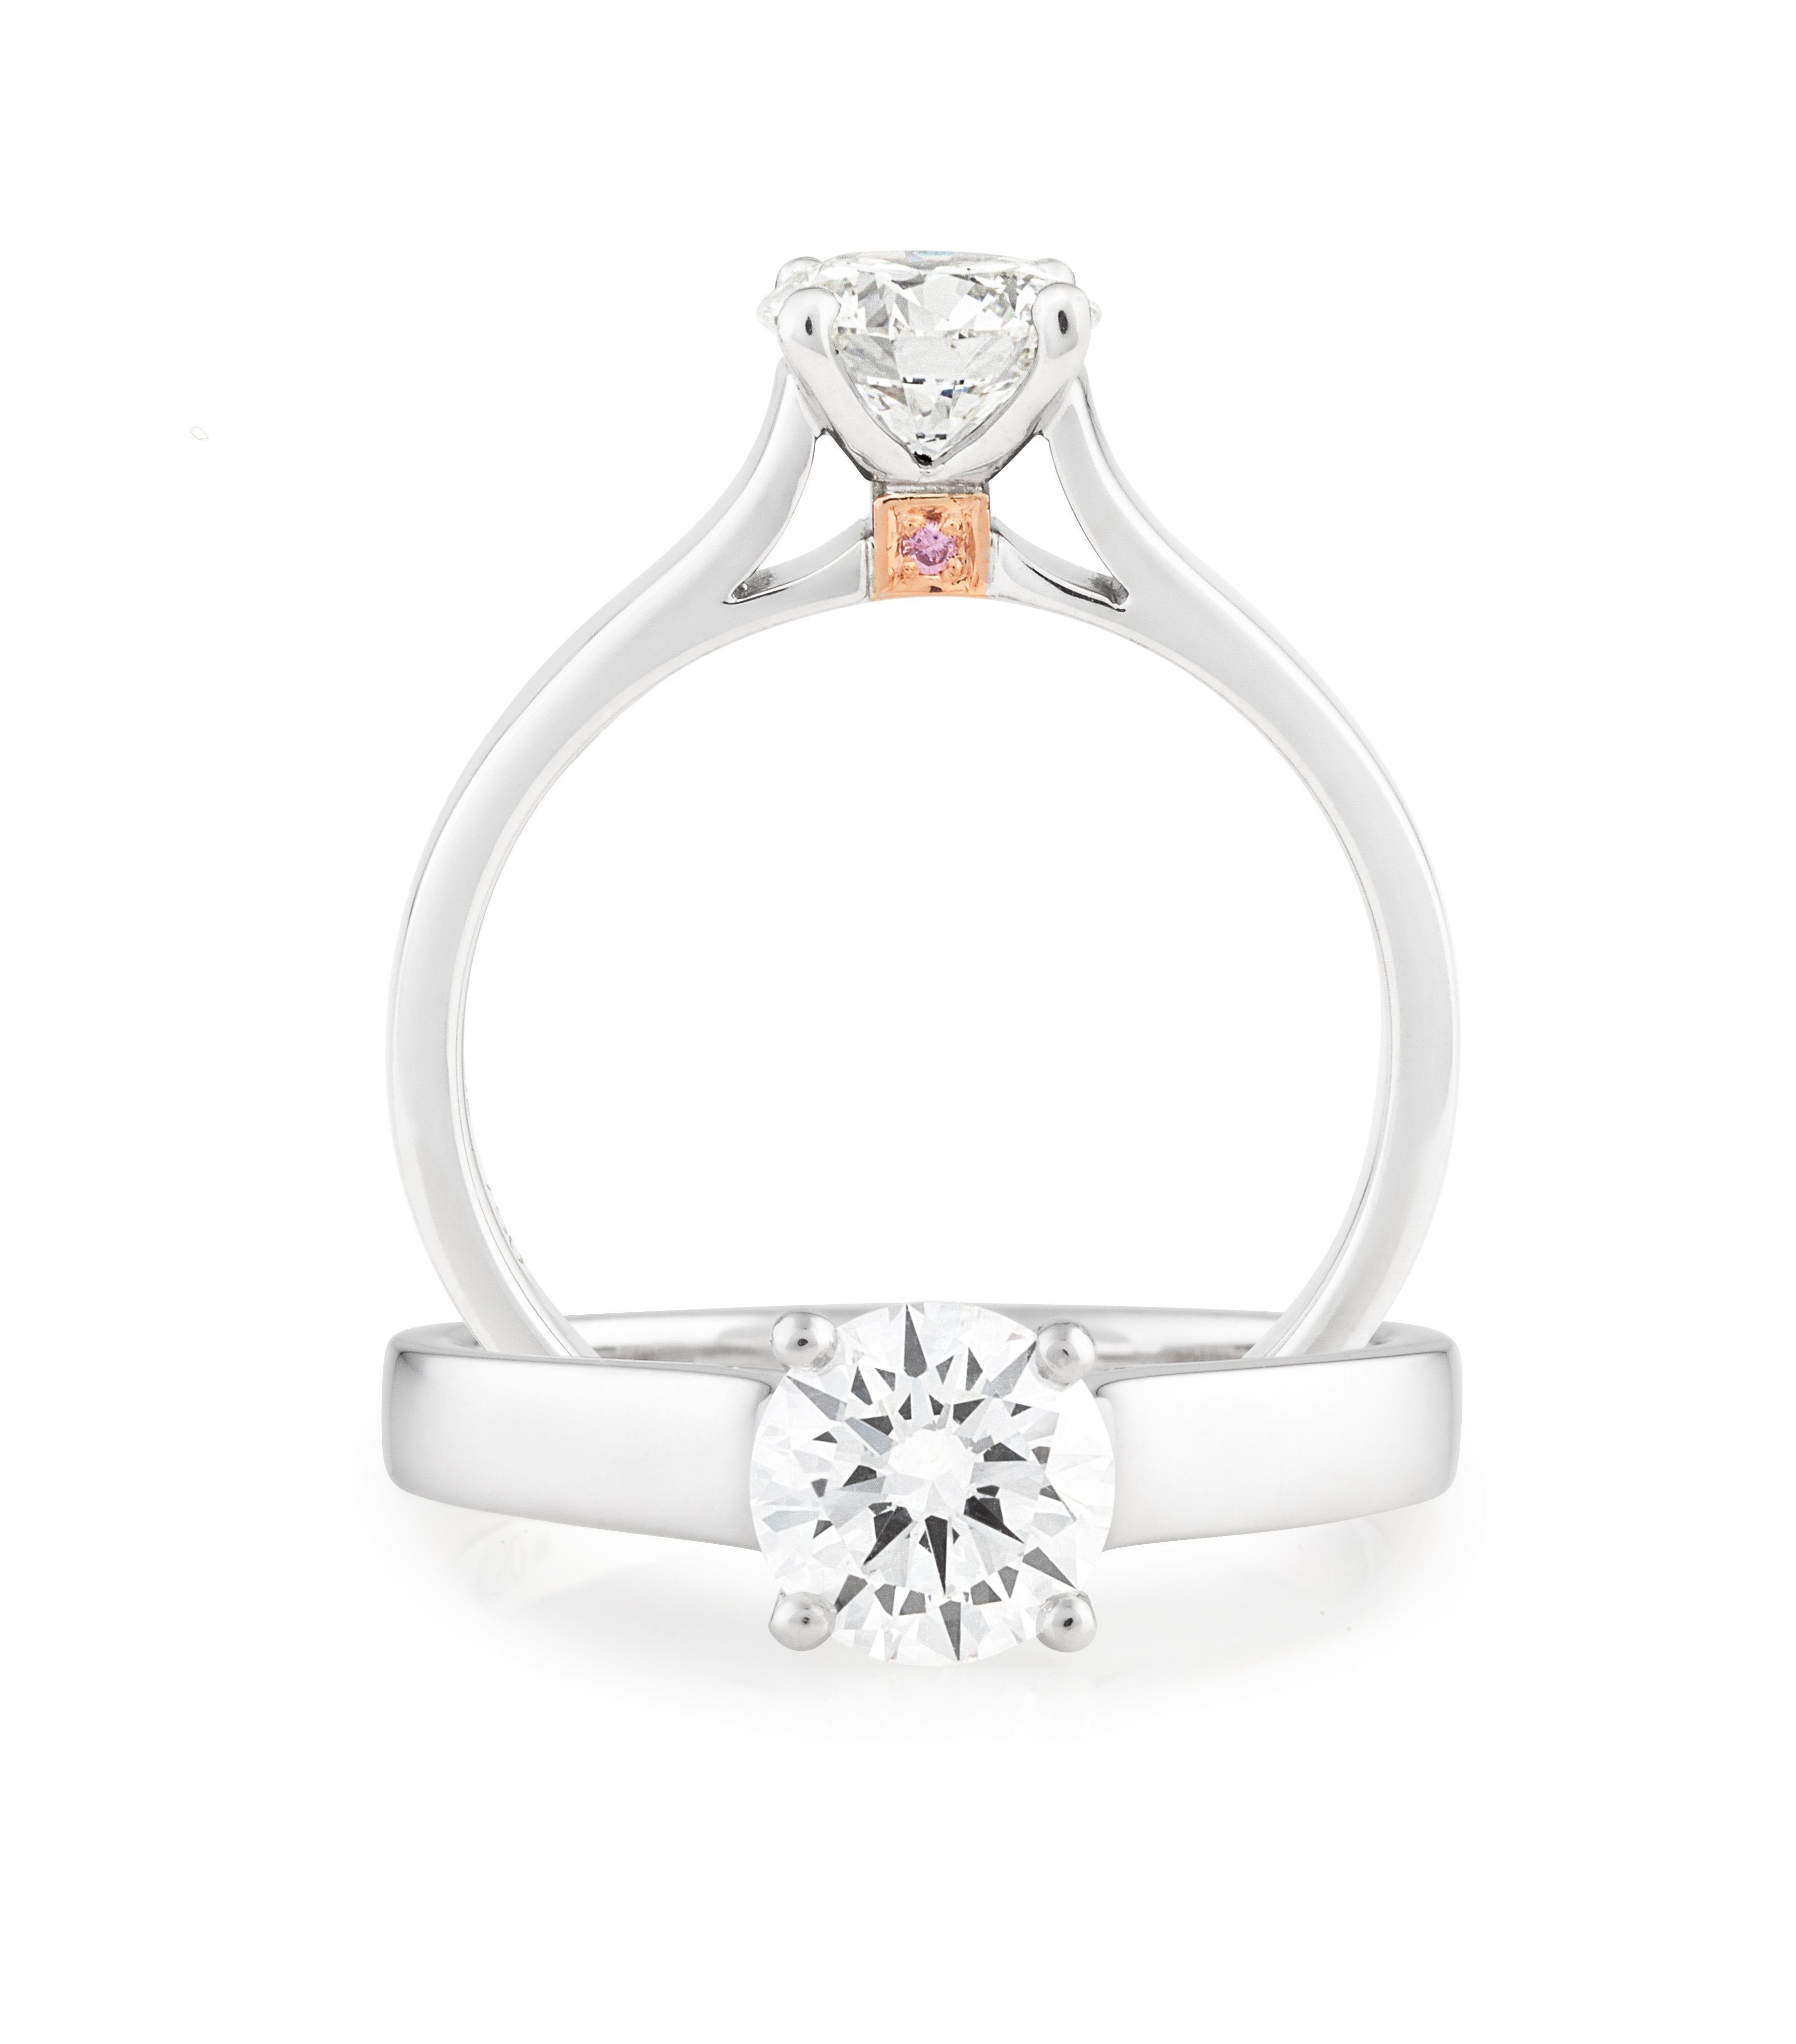 PINK CAVIAR 0.51ct White Round Brilliant Cut & Pink Diamond Engagement Ring in 18ct White Gold